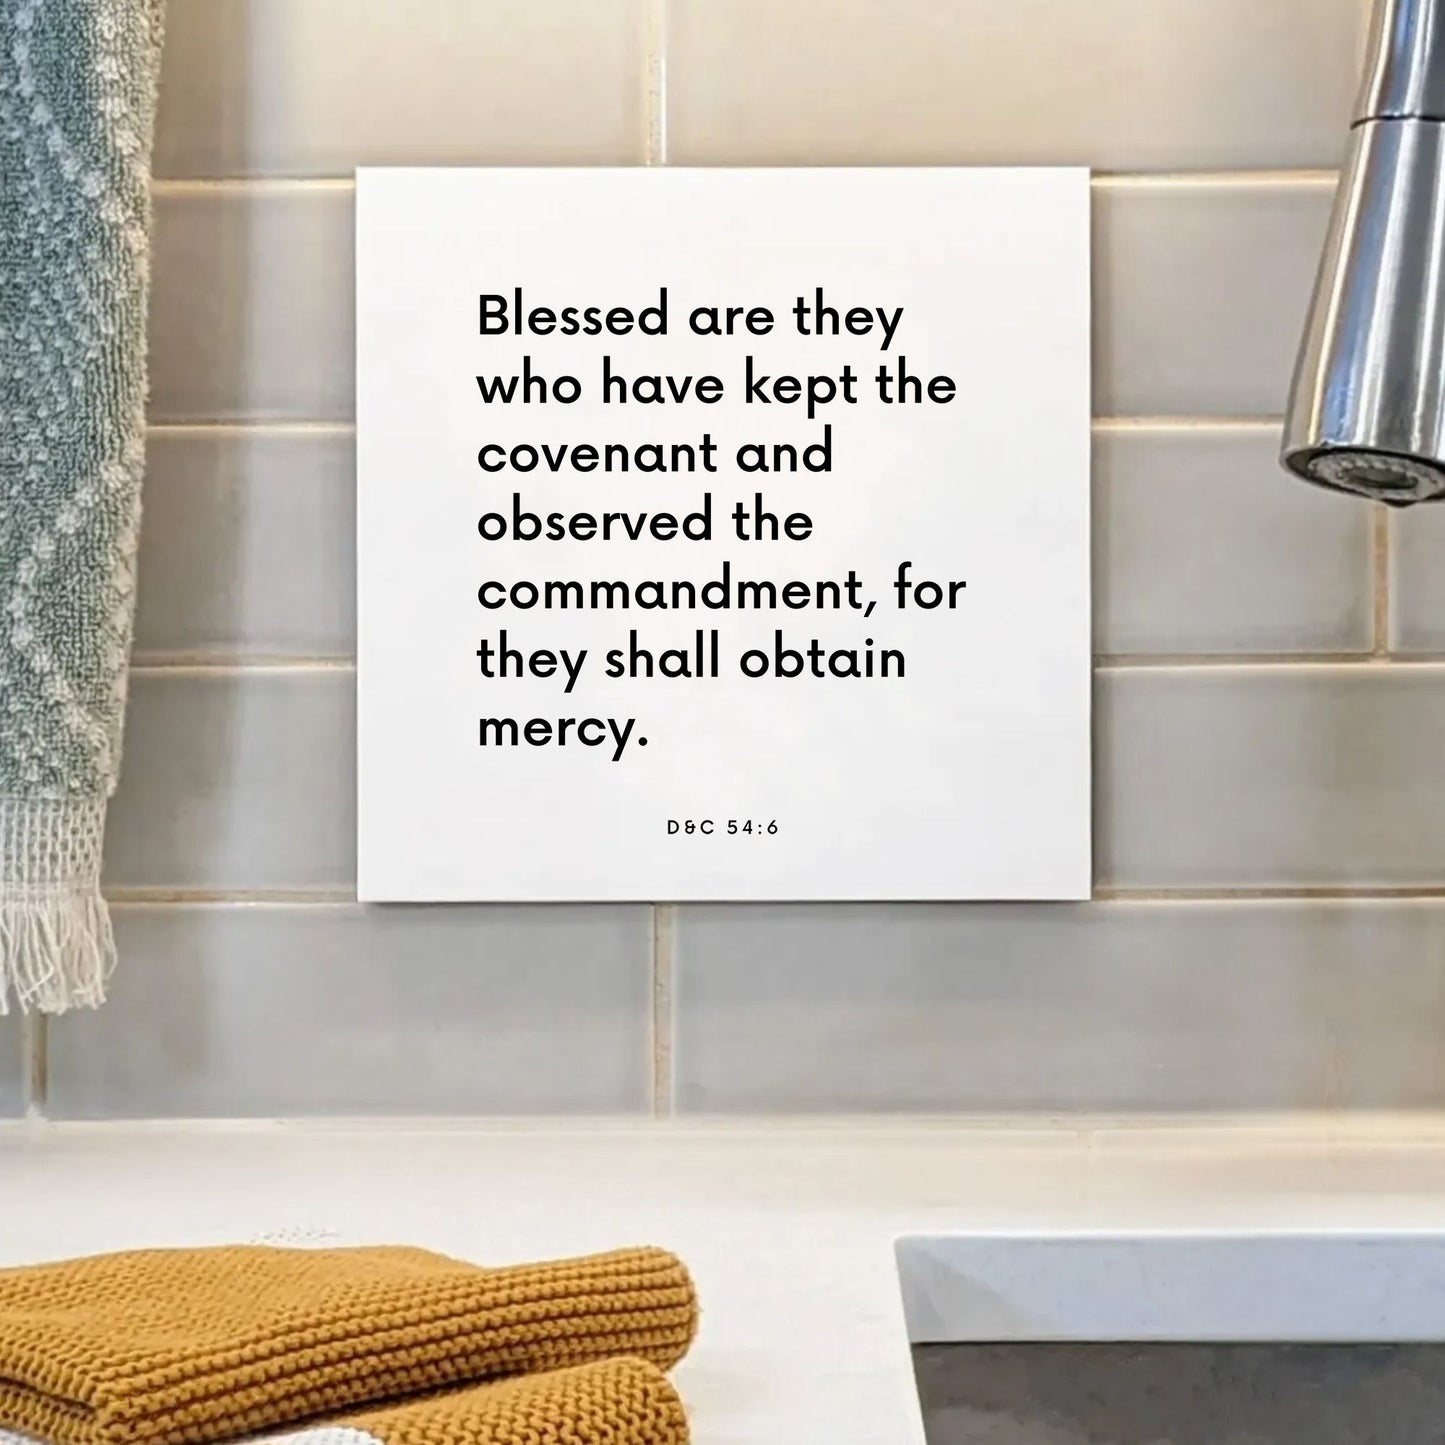 Sink mouting of the scripture tile for D&C 54:6 - "Blessed are they who have kept the covenant"